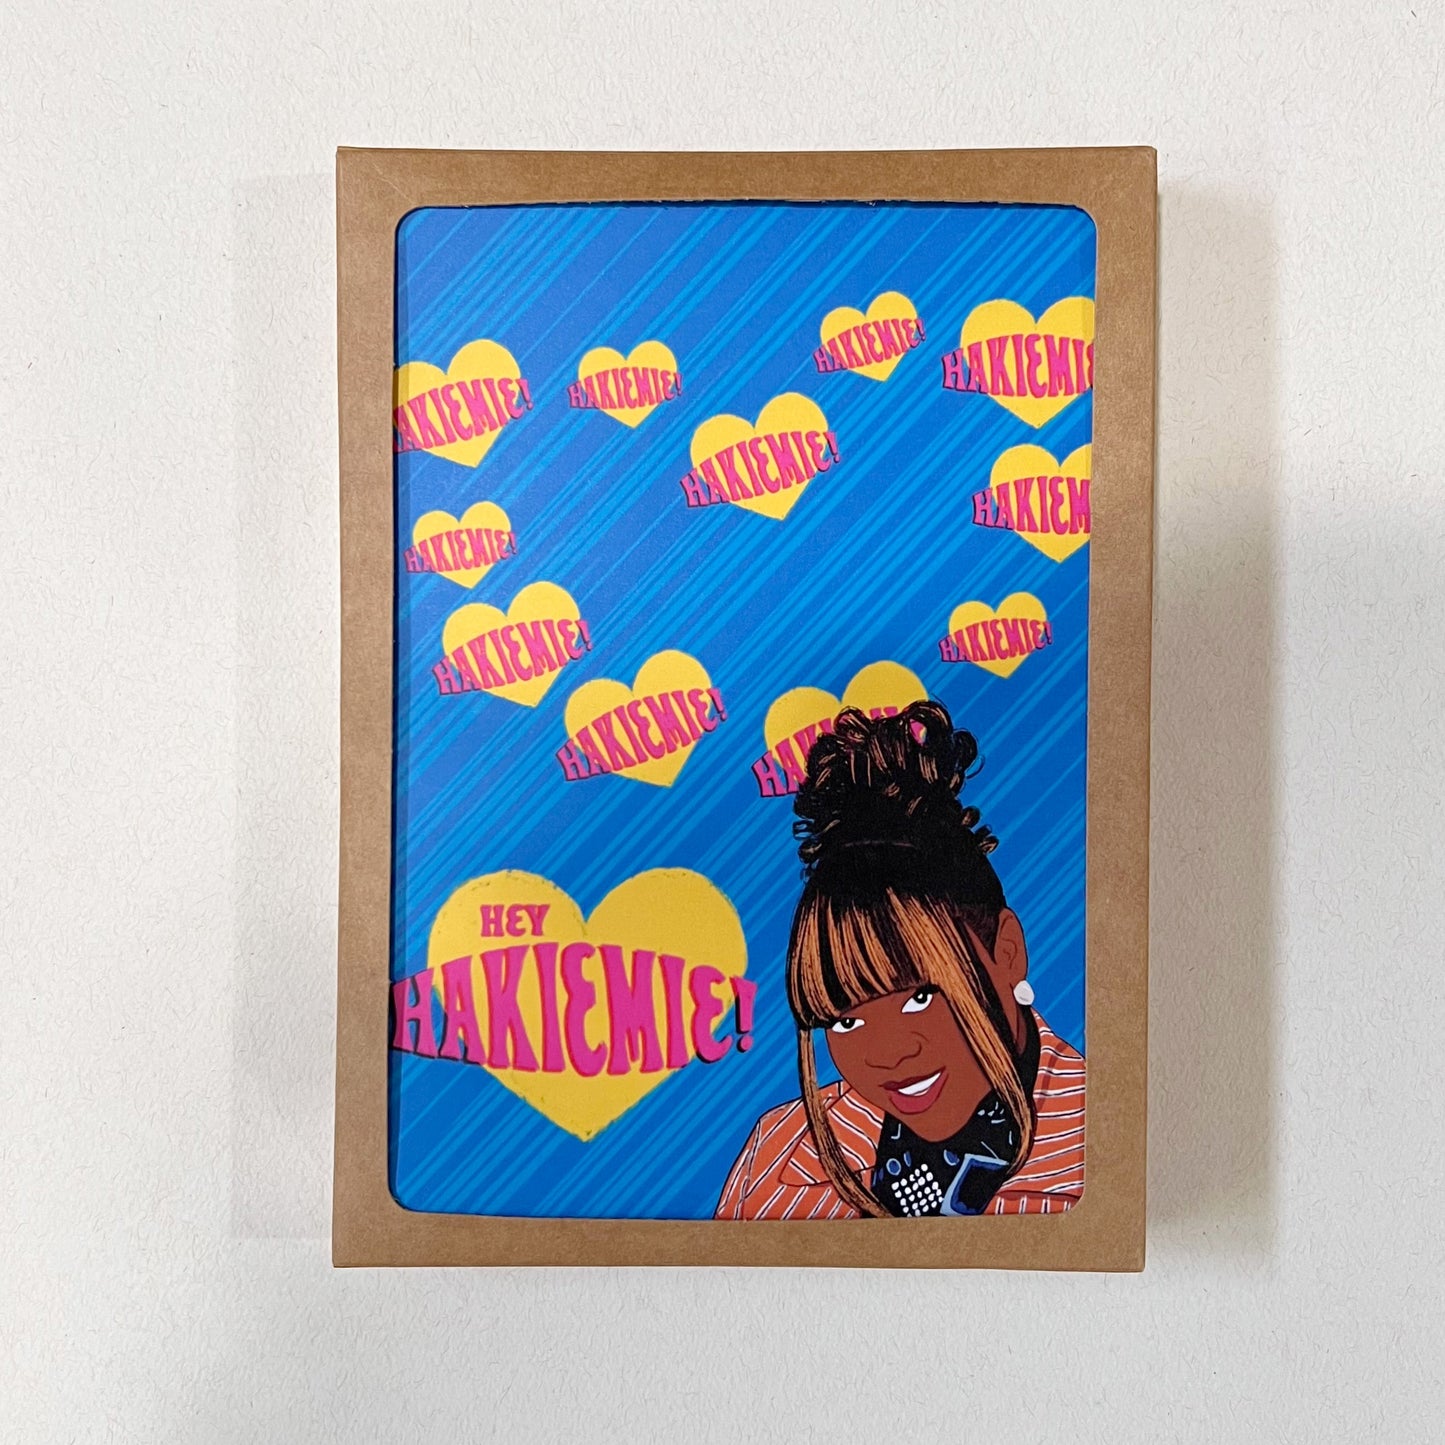 Hey Hakiemie 5x7” Kim Parker Moesha love valentines day greeting card from Goods Made By Digitrillnana, Ashley Fletcher. Perfect card for valentines day! Black Woman Owned.